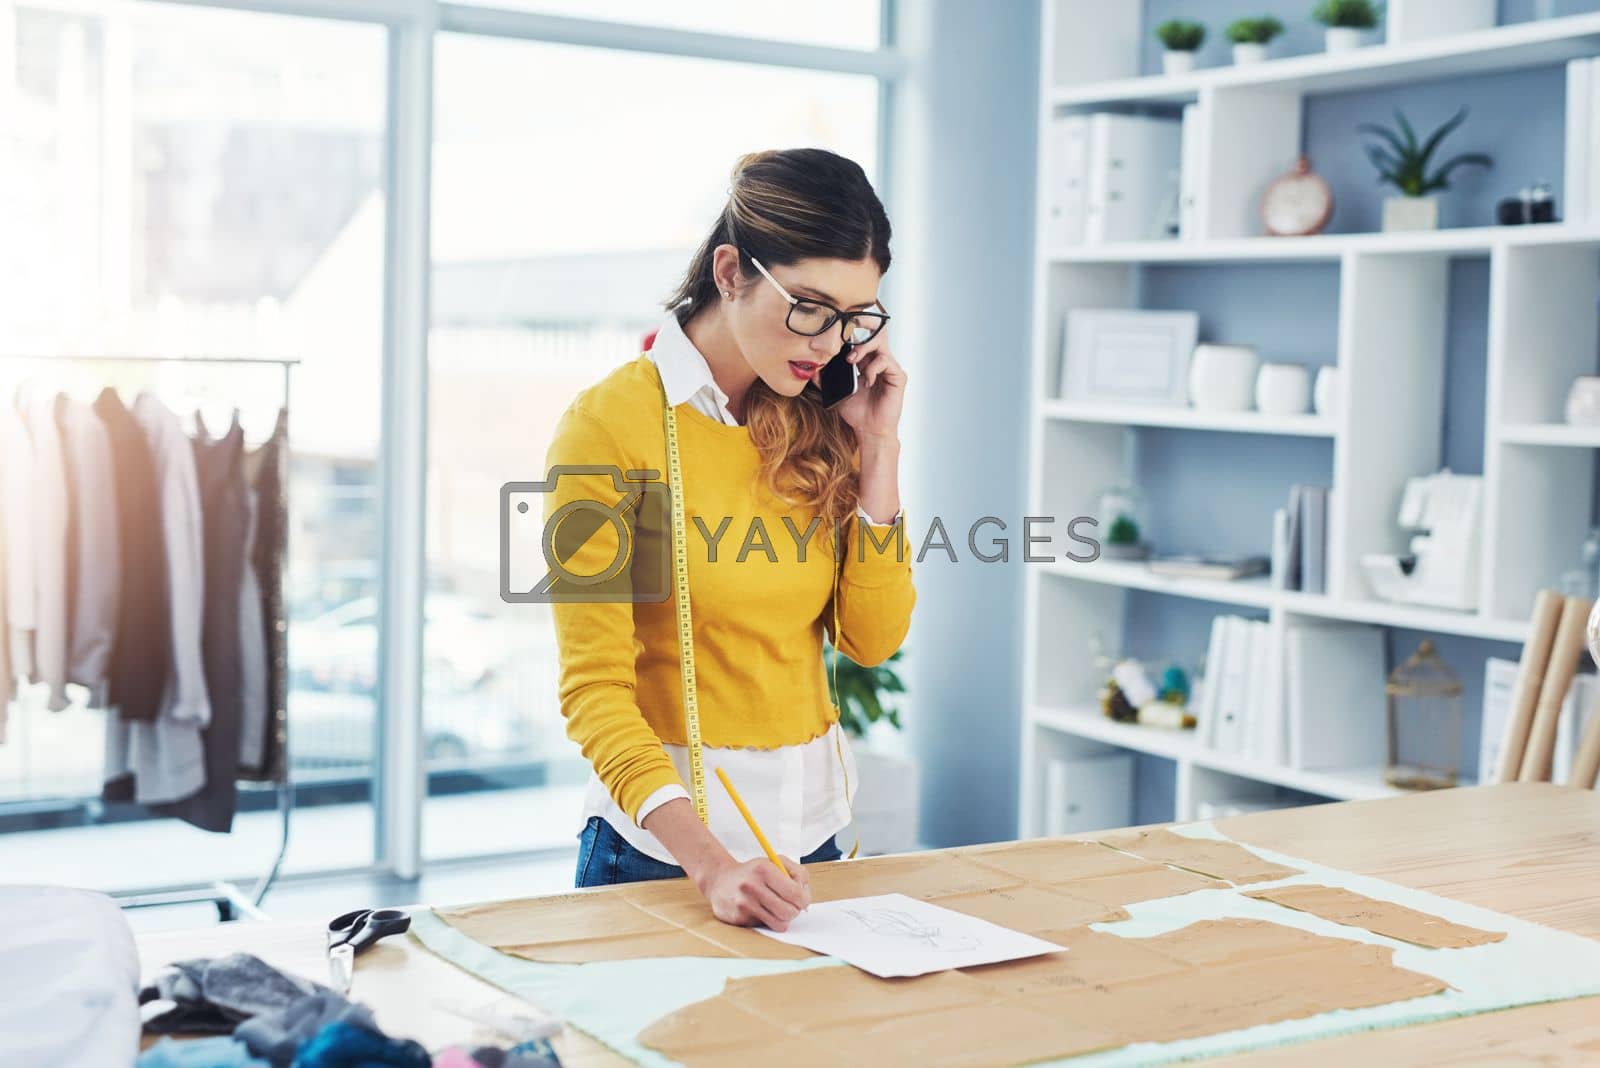 Royalty free image of Lets talk fashion. an attractive young fashion designer in her workshop. by YuriArcurs